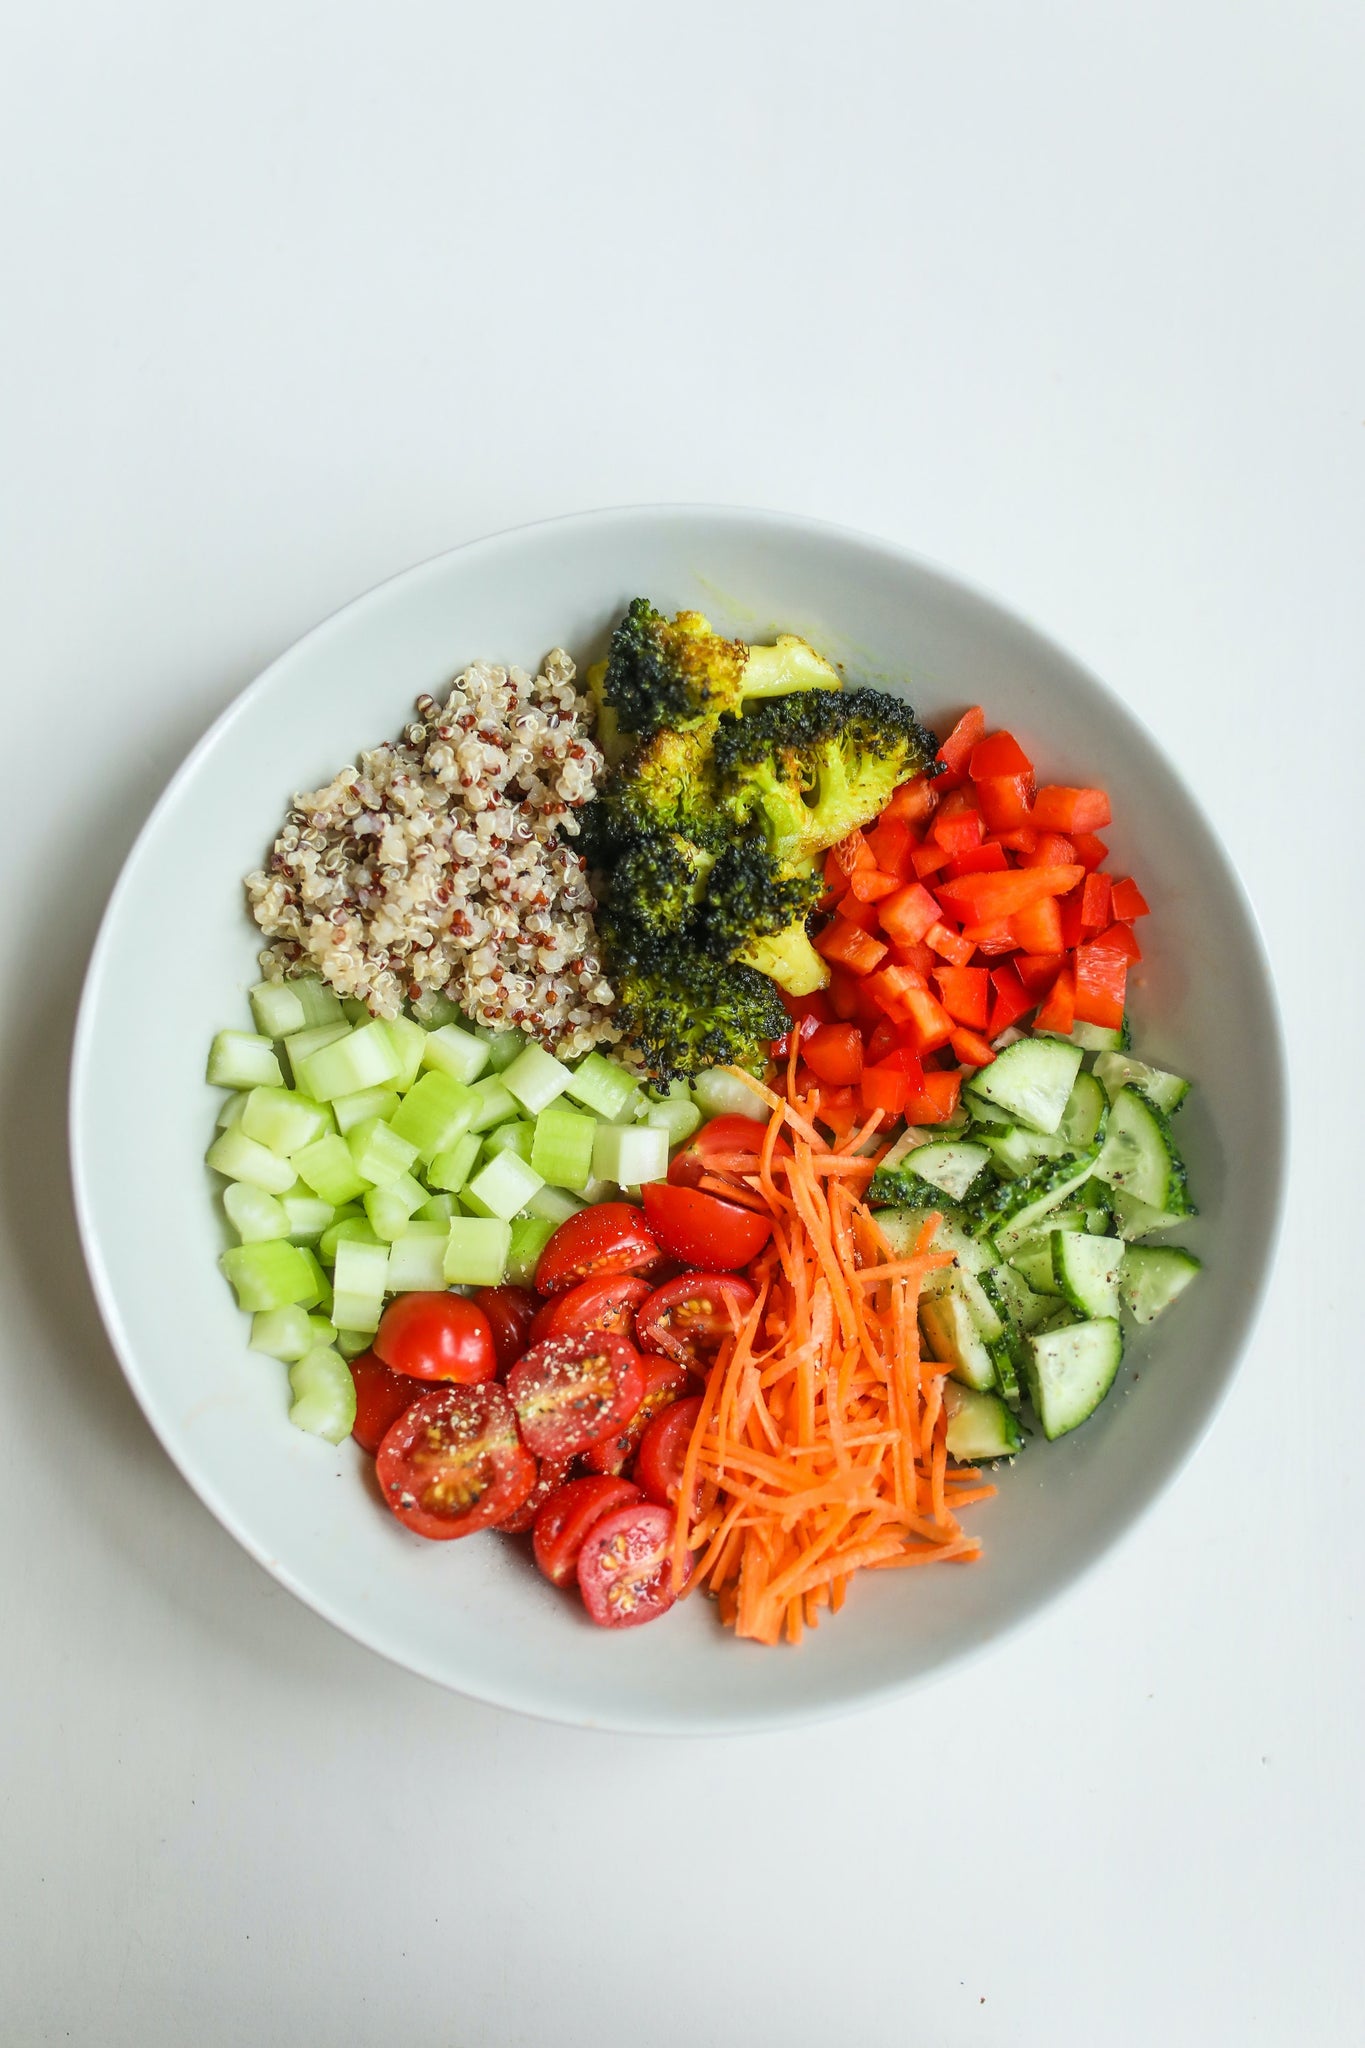 A picture of a healthy salad that's good for your brain and gut, very colorful, and a white salad bowl on a white background. Gut	Probiotics Brain health	Prebiotics Gut-brain axis	Inflammation Gut microbiome	Fiber Digestive health	Cognitive function